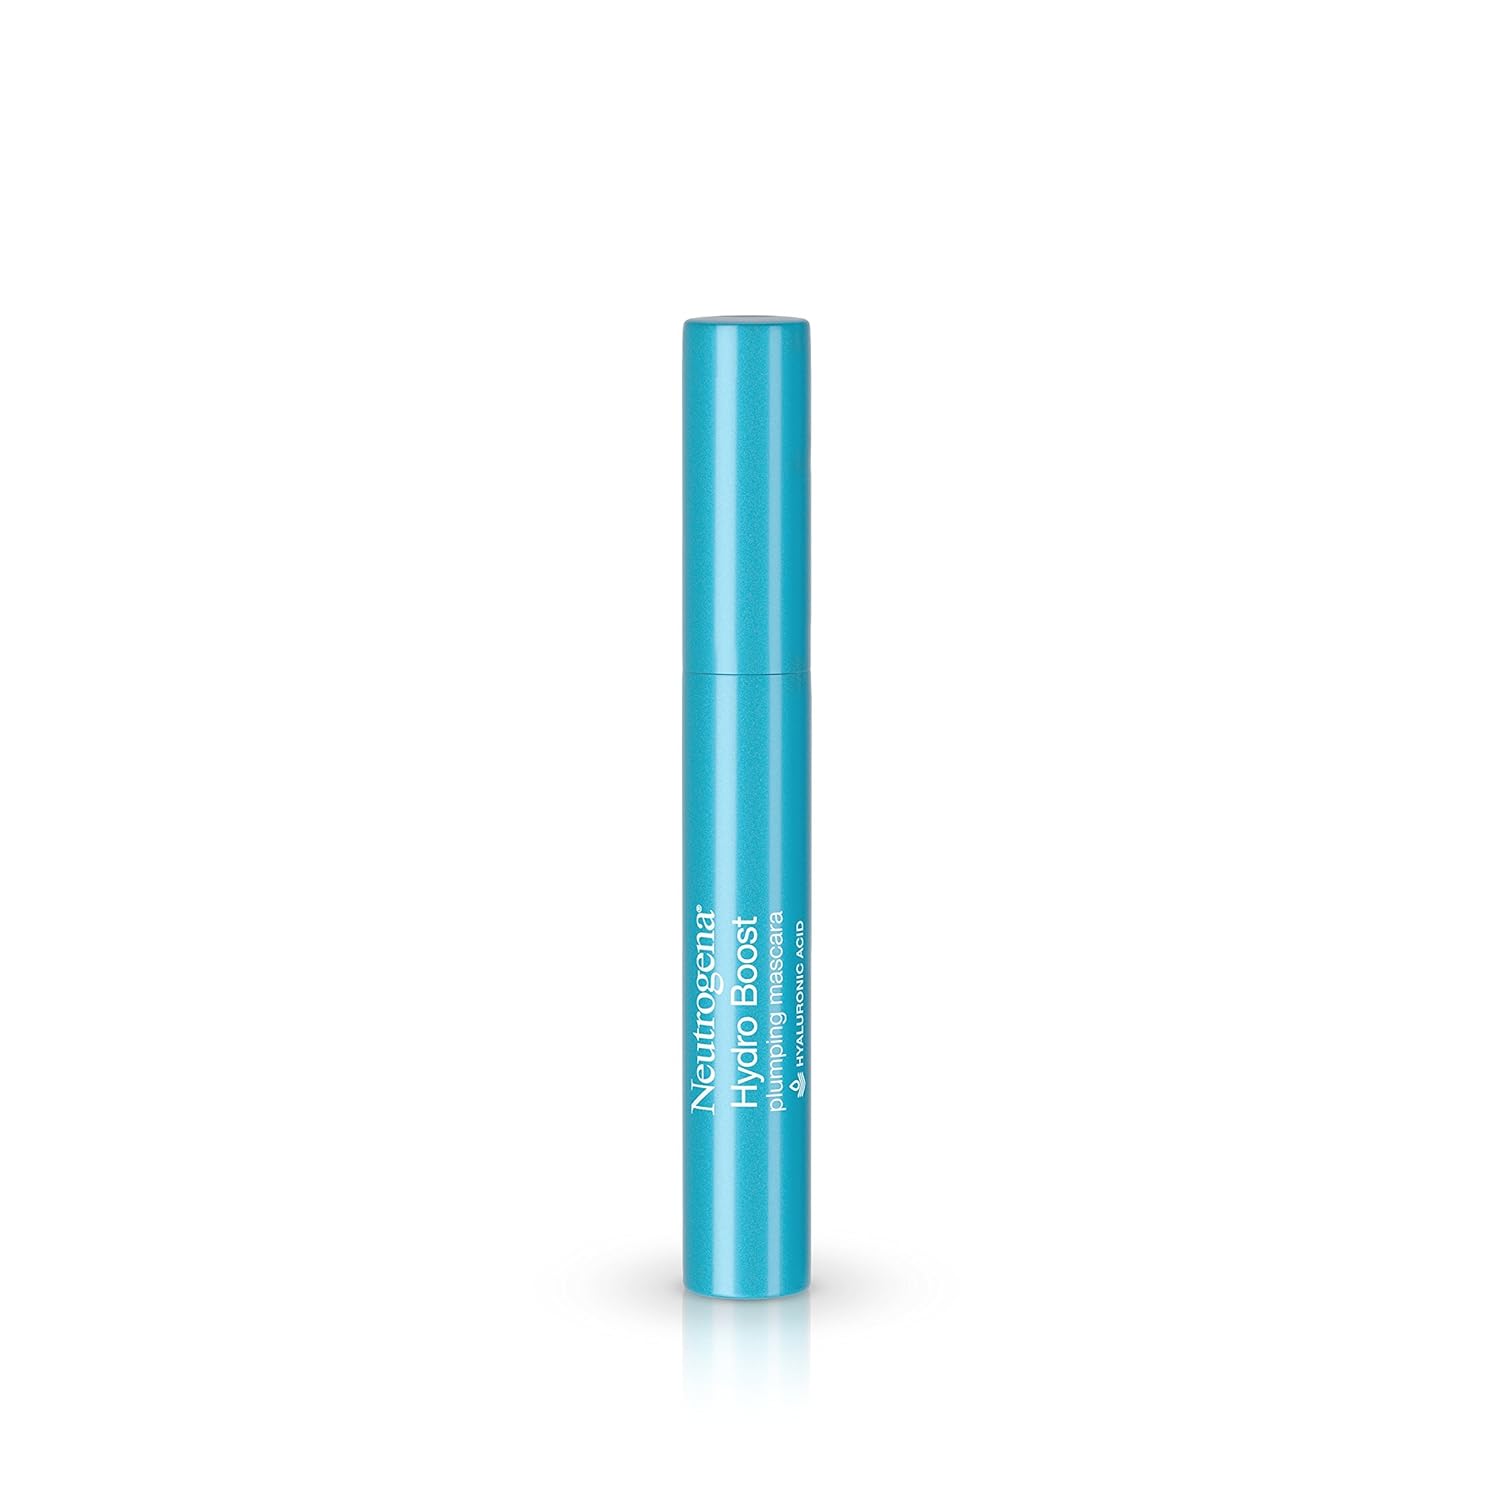 Neutrogena Hydro Boost Plumping Mascara Enriched with Hydrating Hyaluronic Acid, Vitamin E, and Keratin for Dry or Brittle Lashes, Black 02,.21 oz